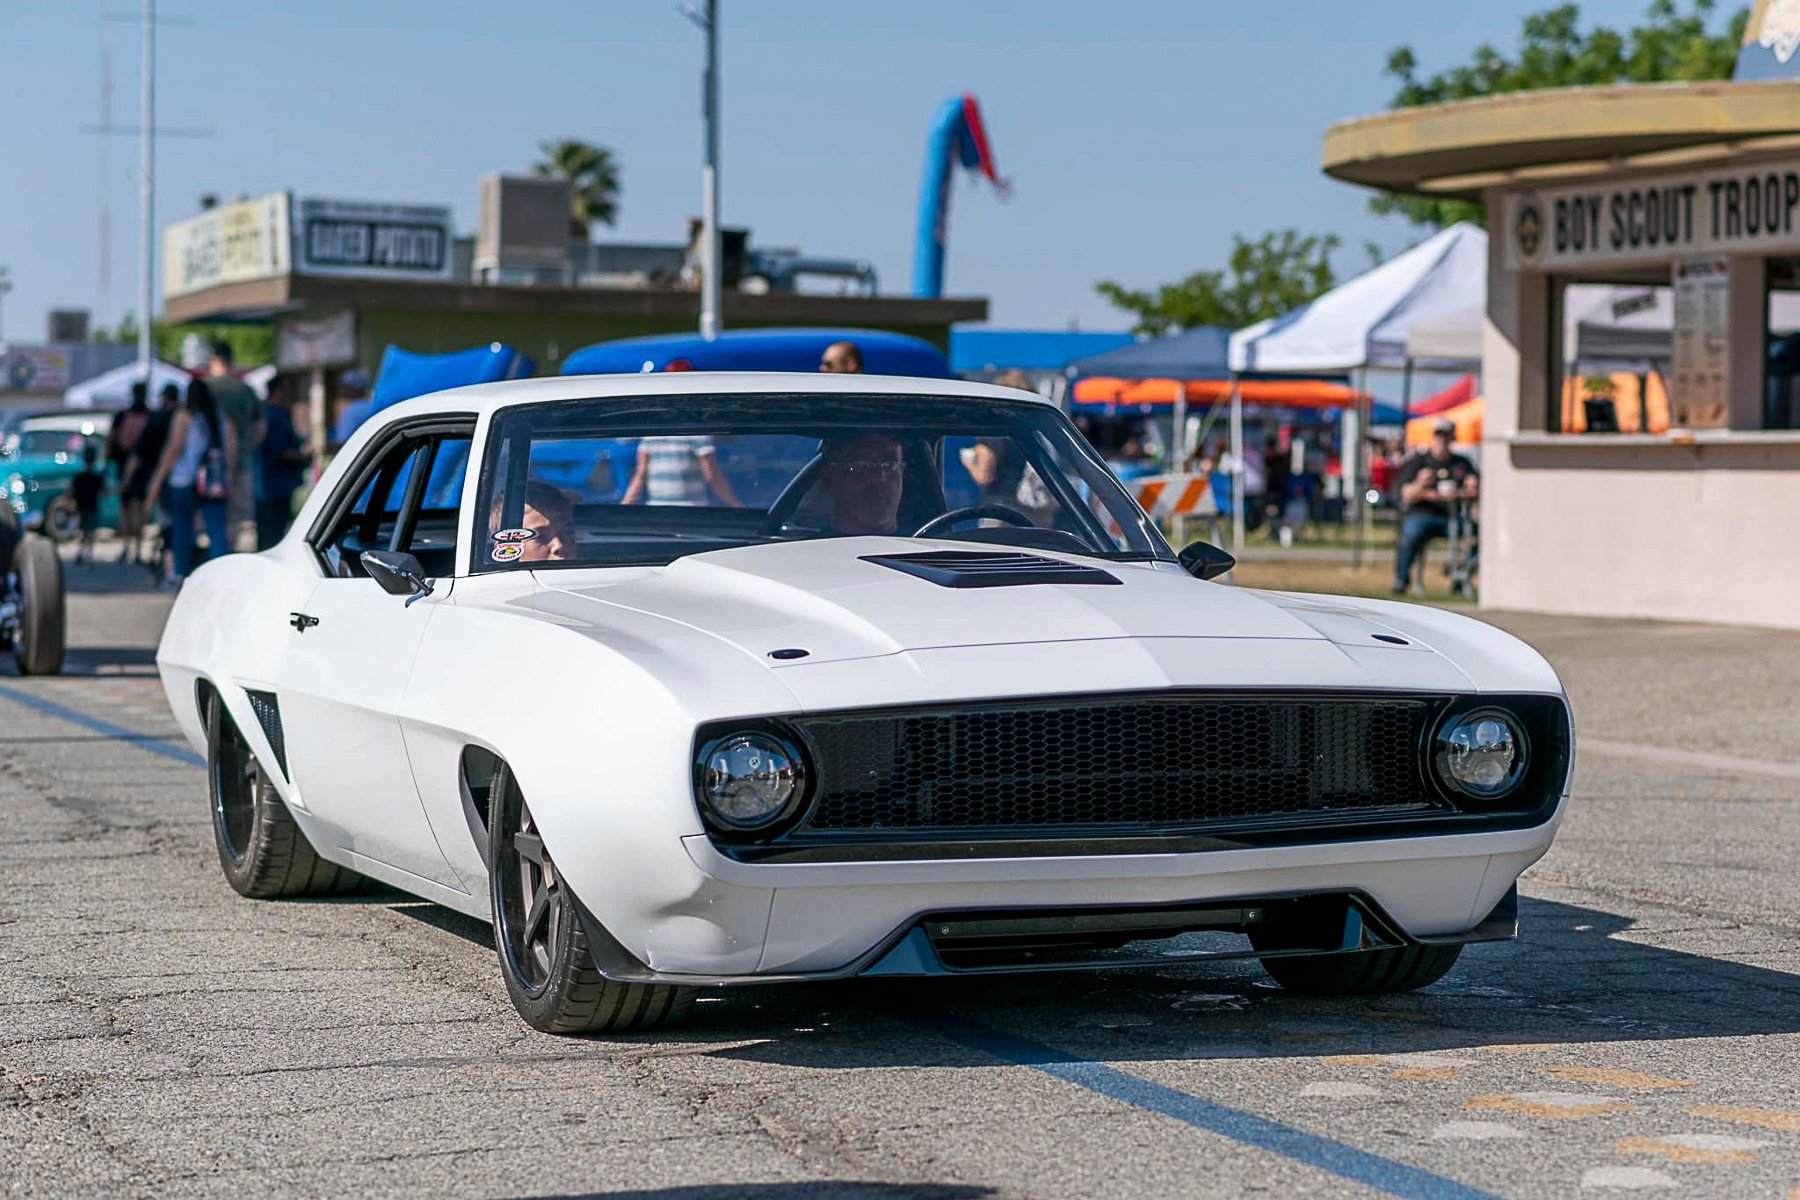 Event Preview: The 46th Annual NSRA Western Street Rod Nationals